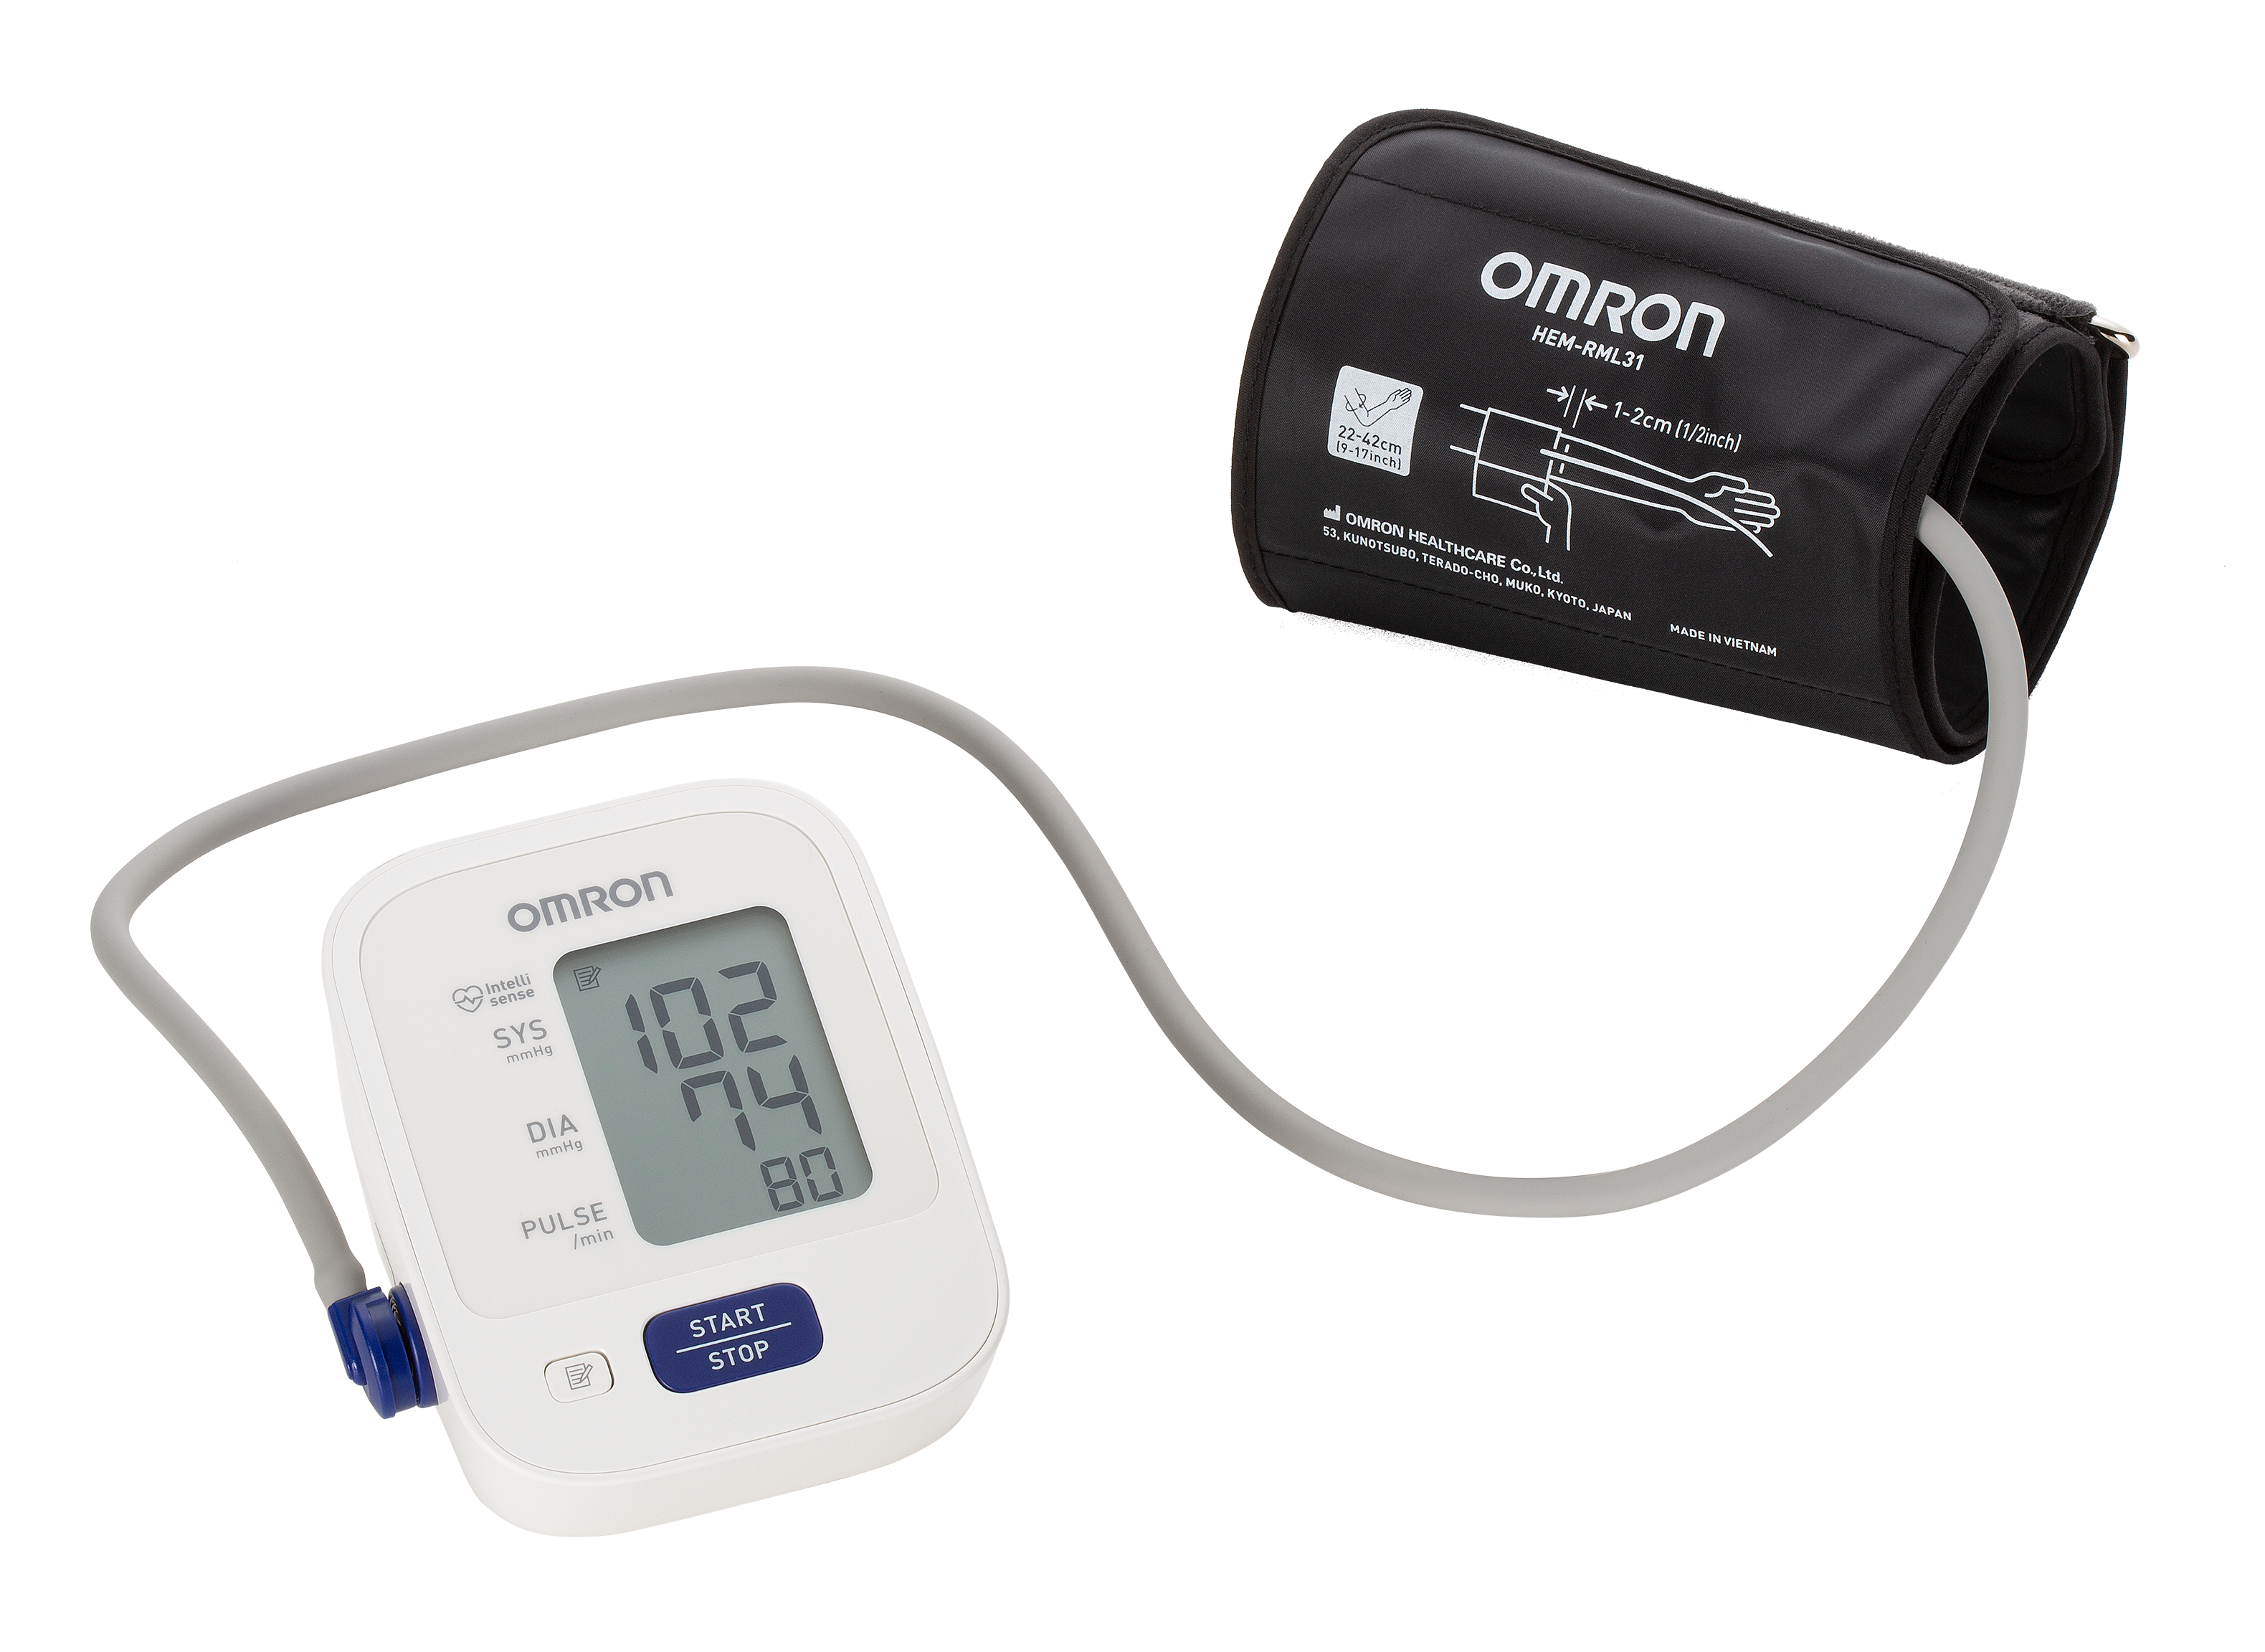 Omron 3 Series BP7100 Blood Pressure Monitor Review - Consumer Reports